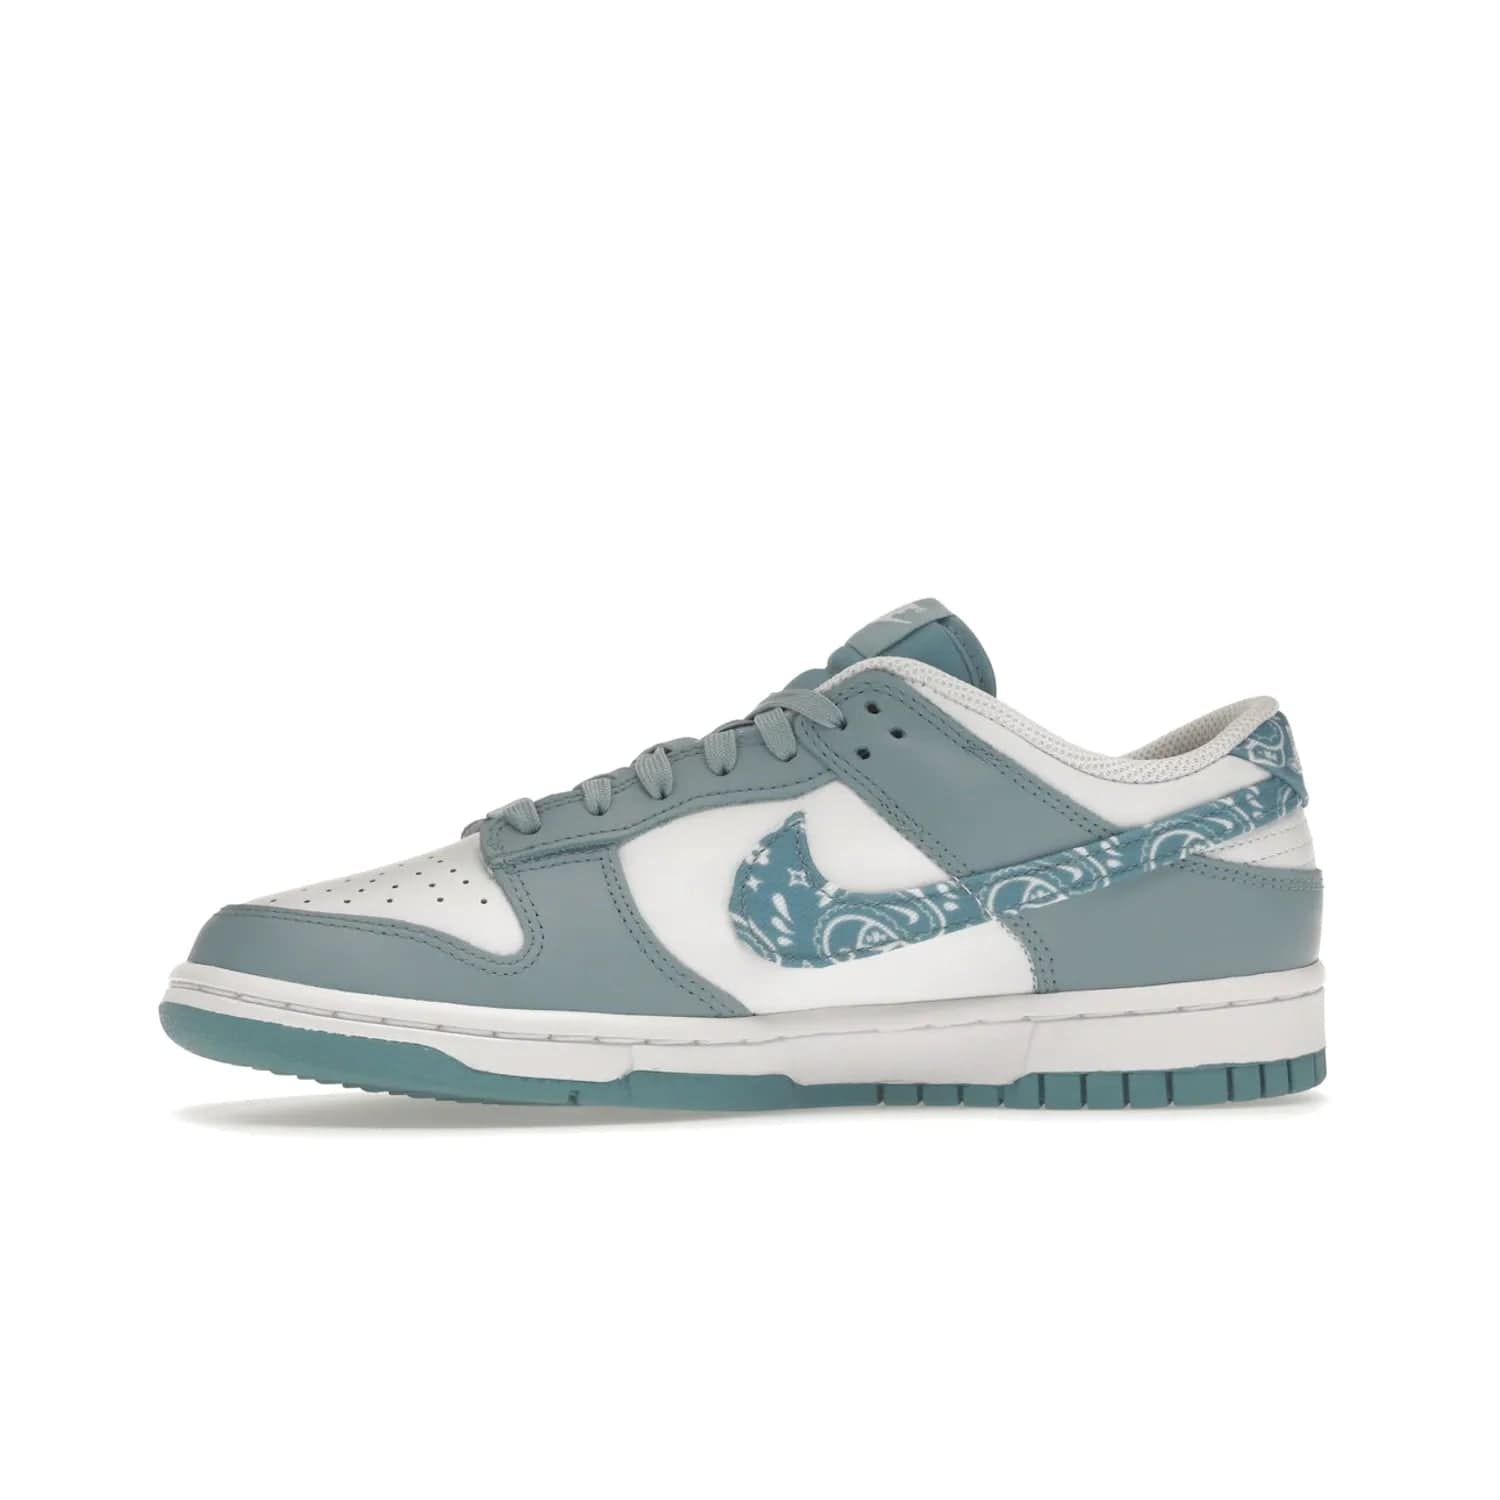 Nike Dunk Low Essential Paisley Pack Worn Blue (Women's) - Image 18 - Only at www.BallersClubKickz.com - Get the Nike Dunk Low Essential Paisley Pack Worn Blue (Women's) for style and comfort. White leather construction, light blue leather overlays, canvas Swooshes and matching heel tabs offer a rich blue hue. Finished by a white and light blue sole, this classic Nike Dunk is the perfect addition to any wardrobe. Released in March 2022.